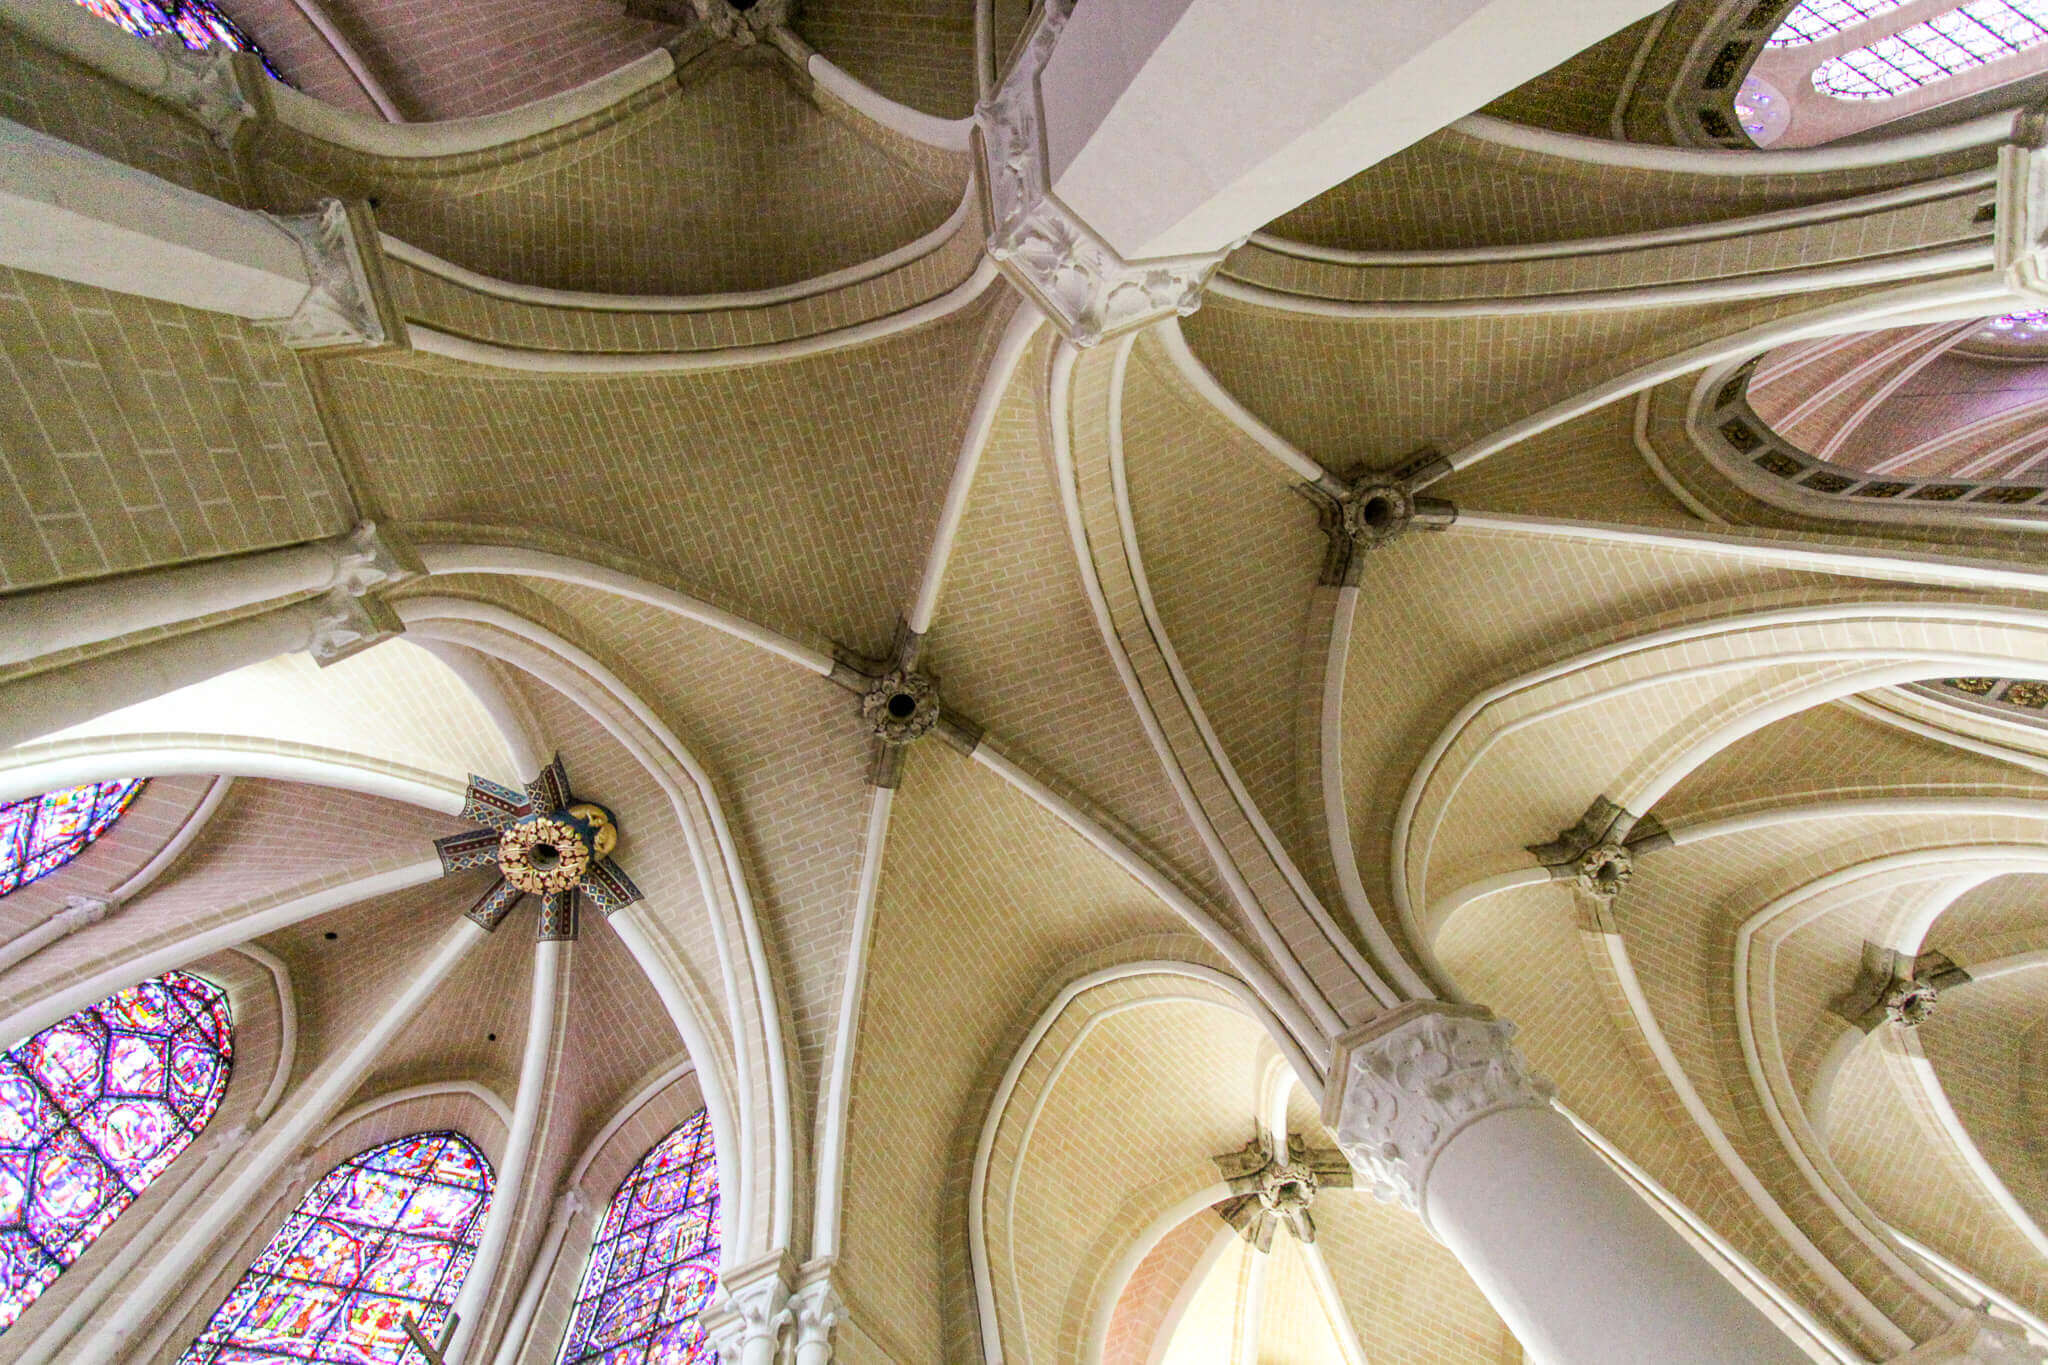 The elaborate Gothic vaulting inside the Chartres Cathedral